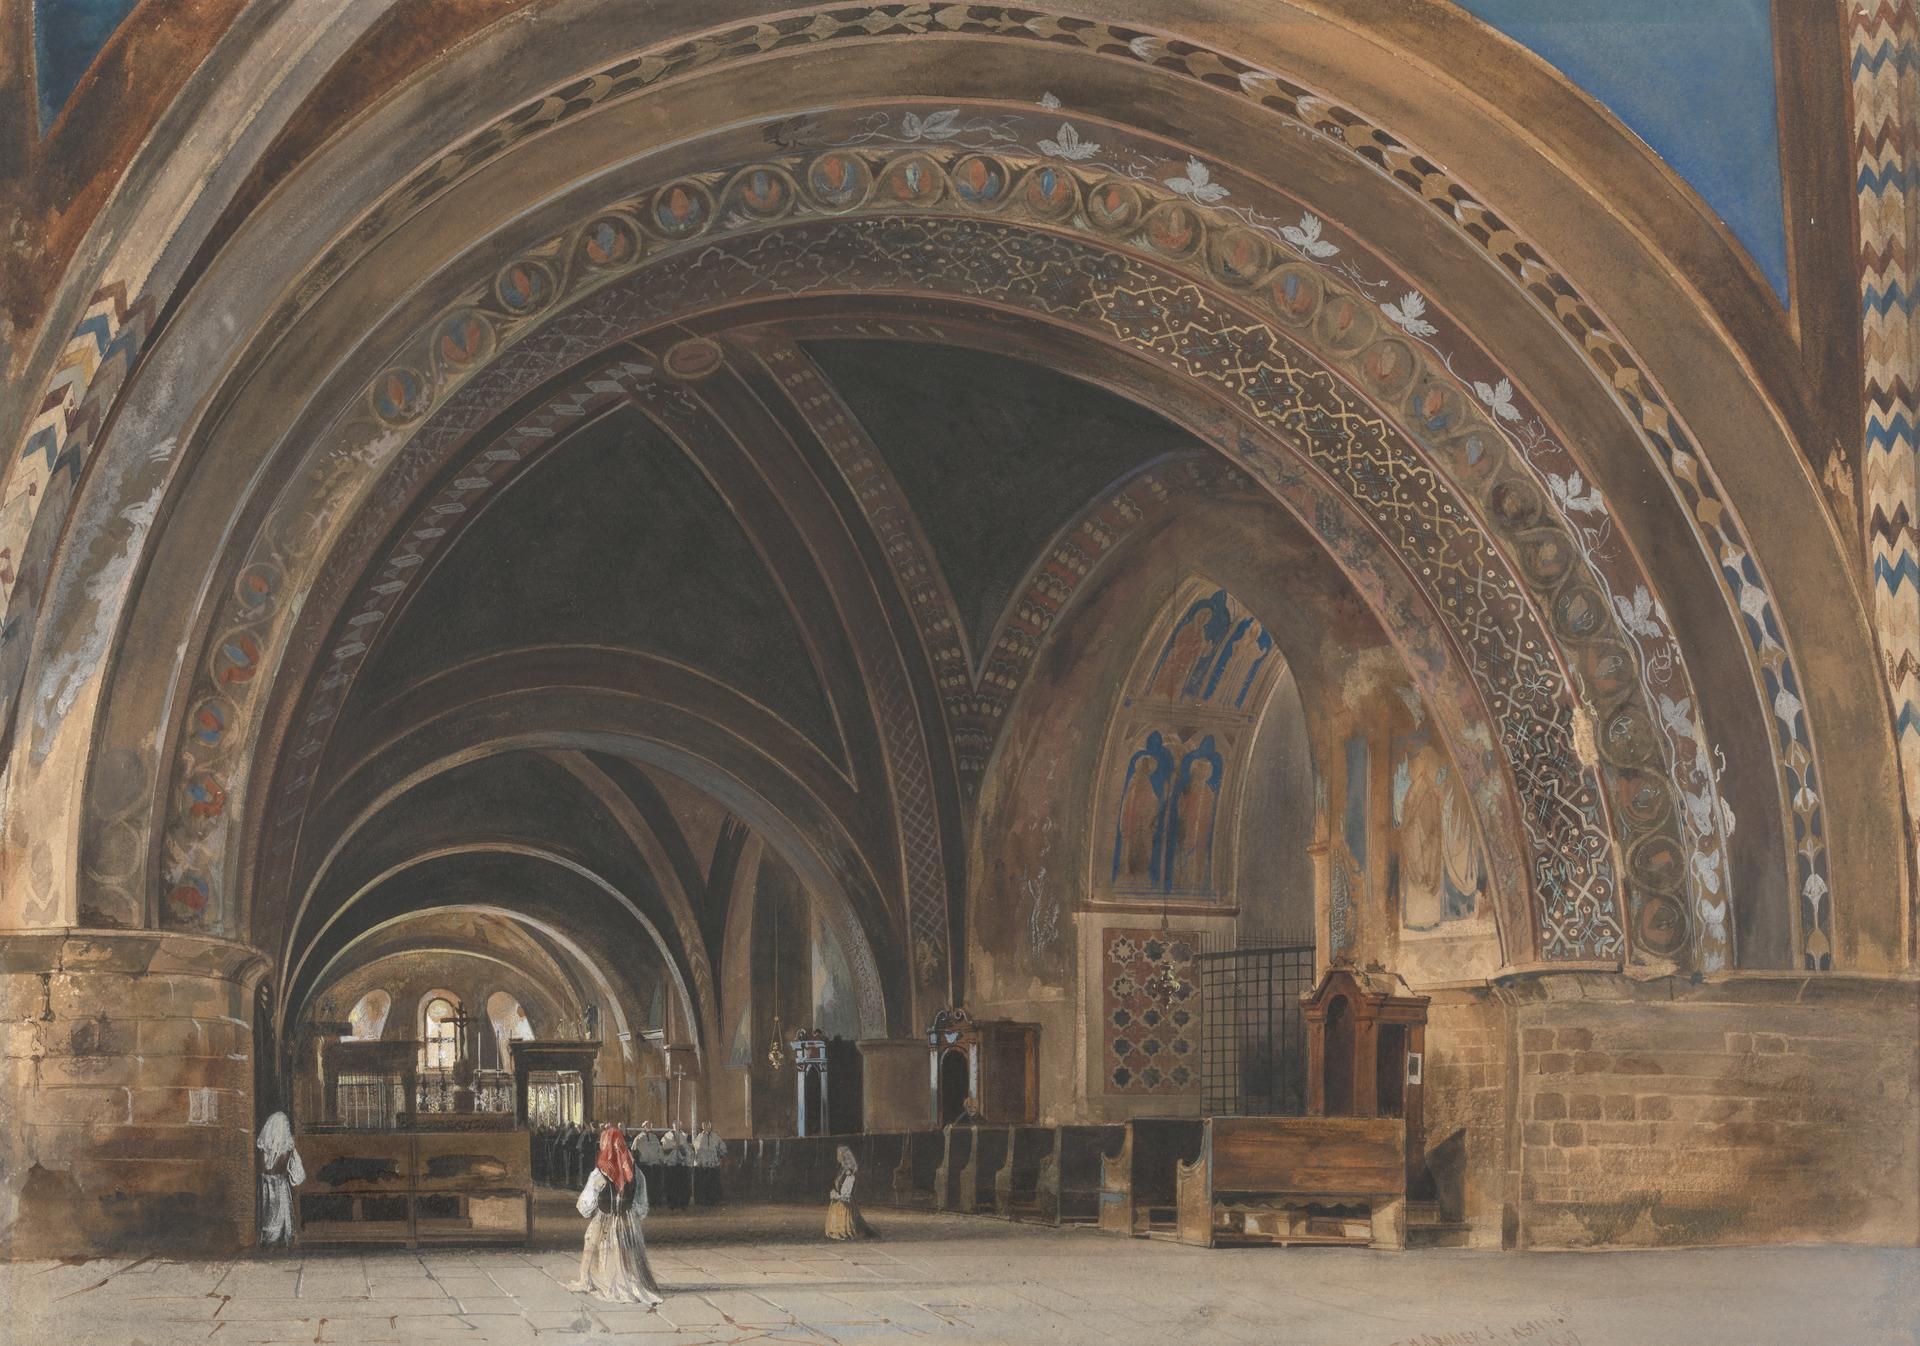 The Interior of the Lower Basilica of St. Francis of Assisi